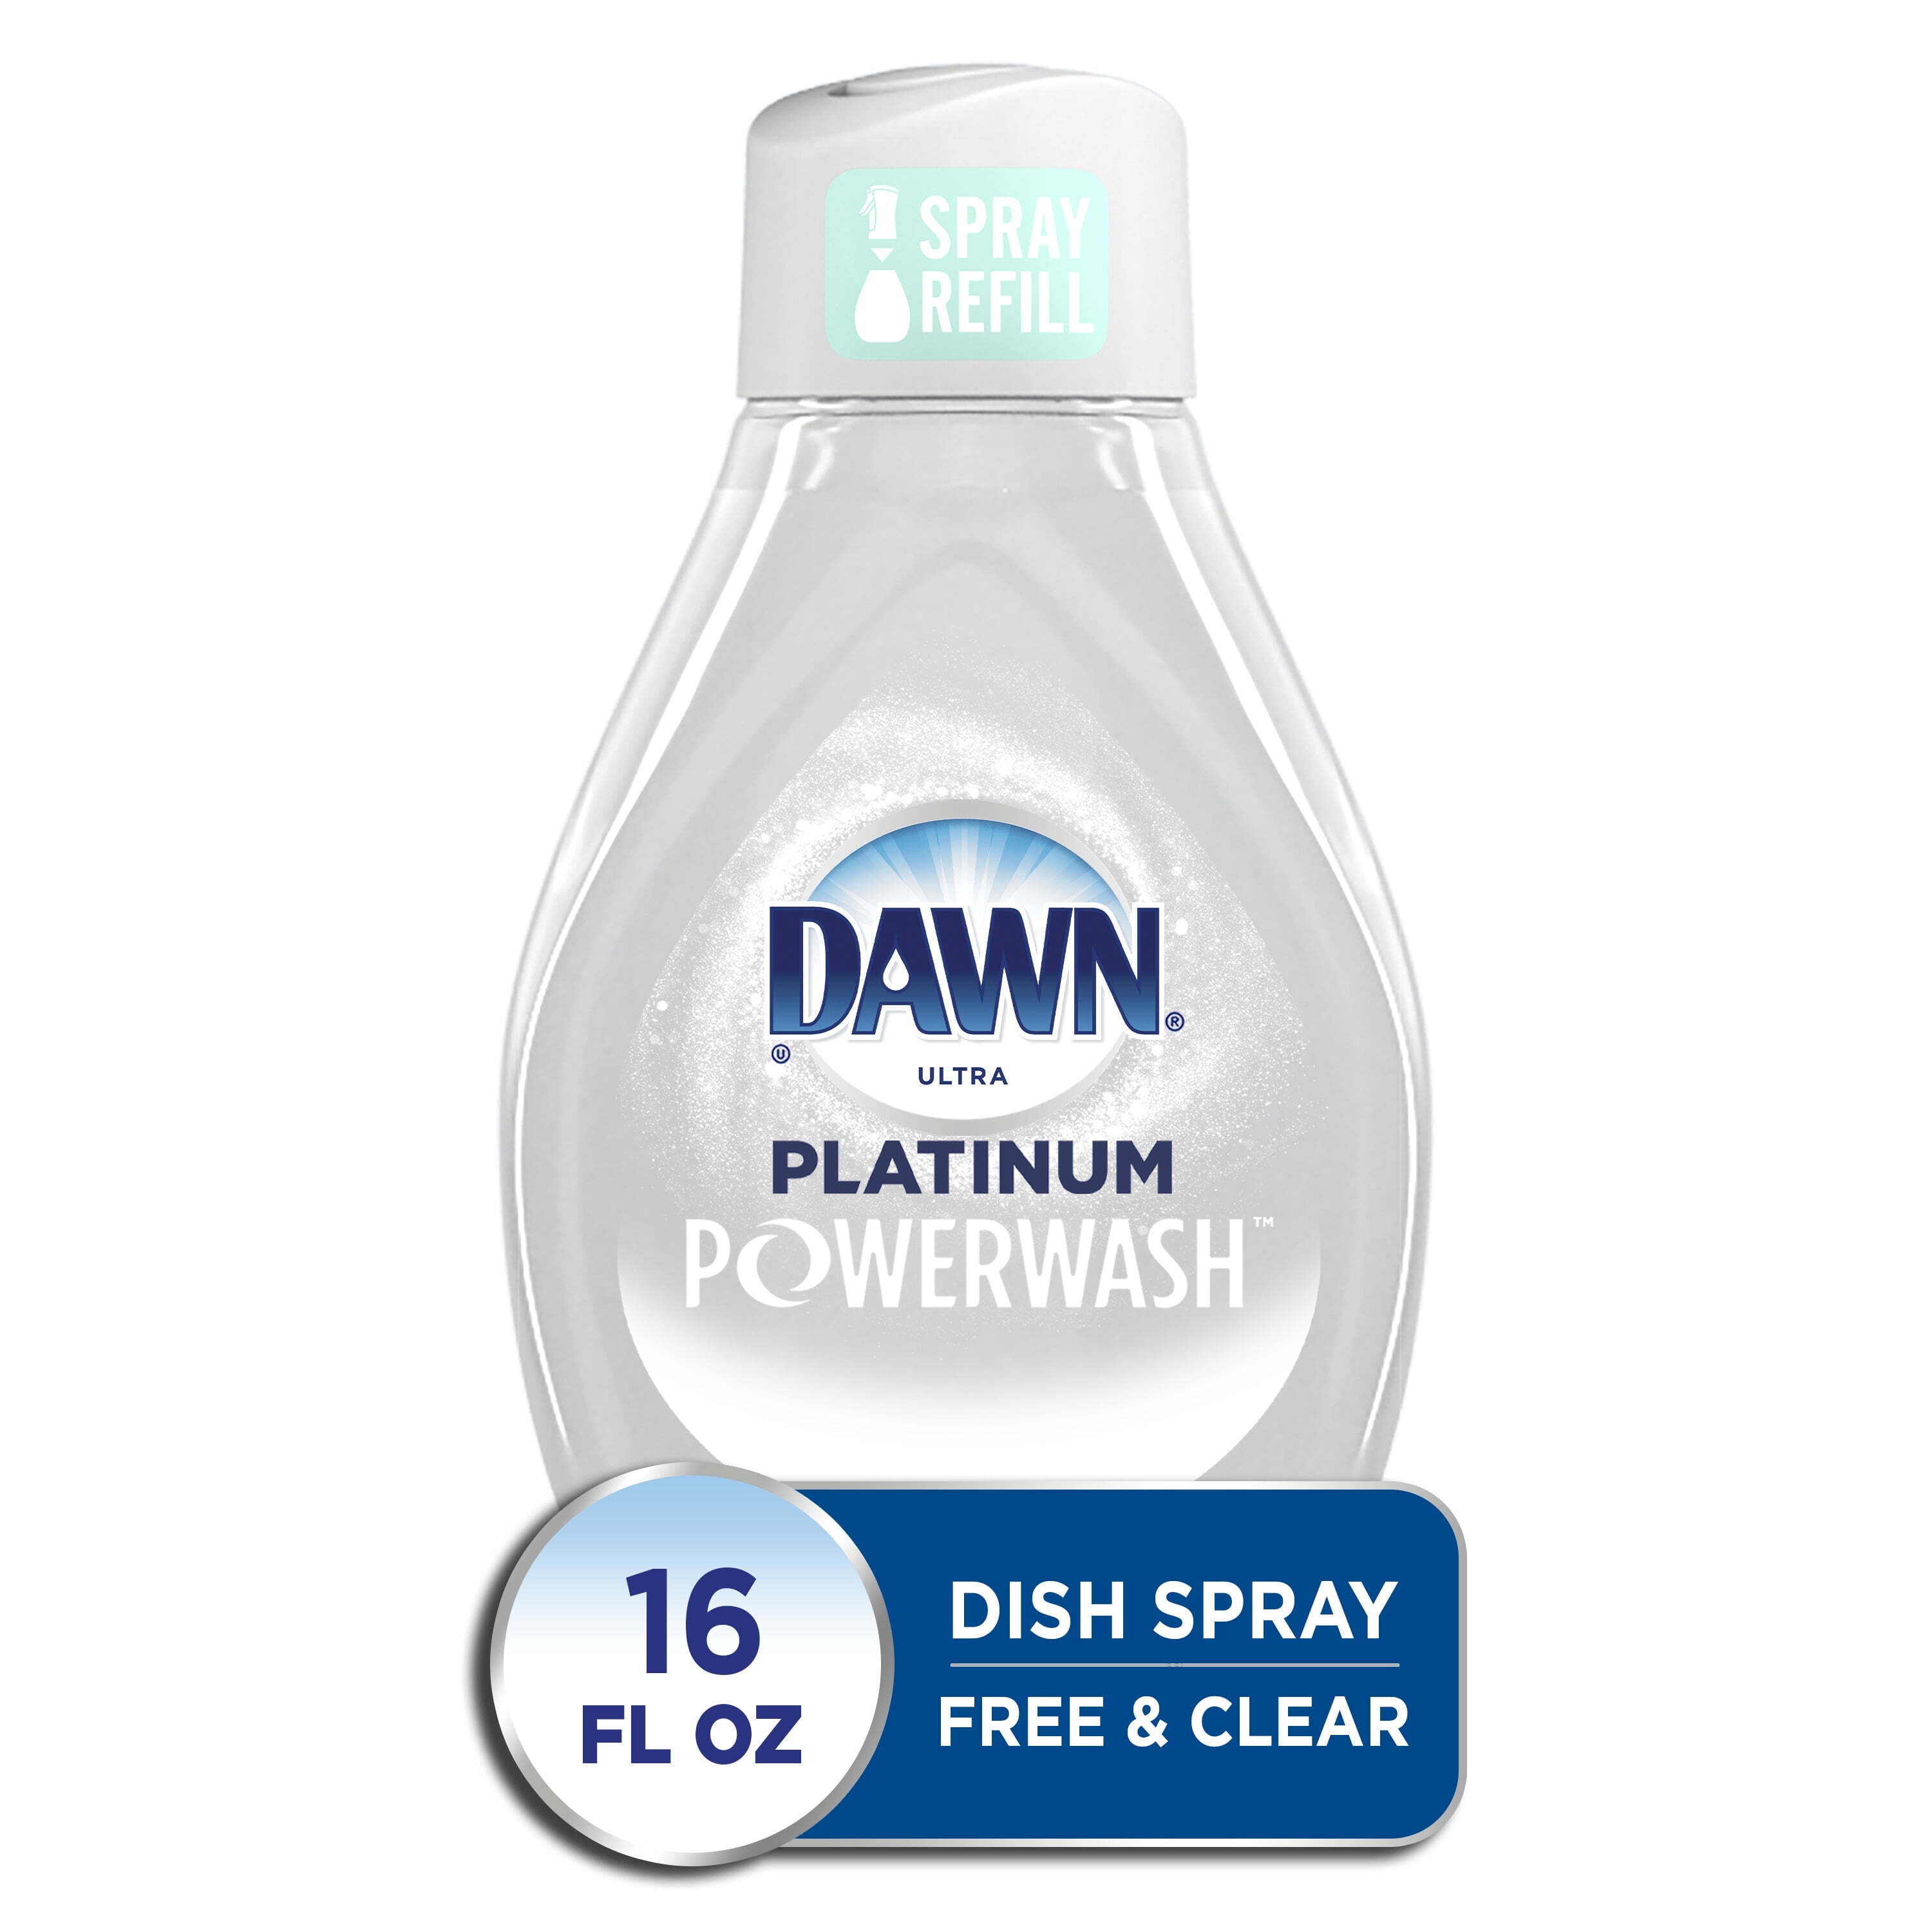 P&G Says Dawn's New Spray Is Best Way to Wash Dishes As-You-Go 12/19/2019